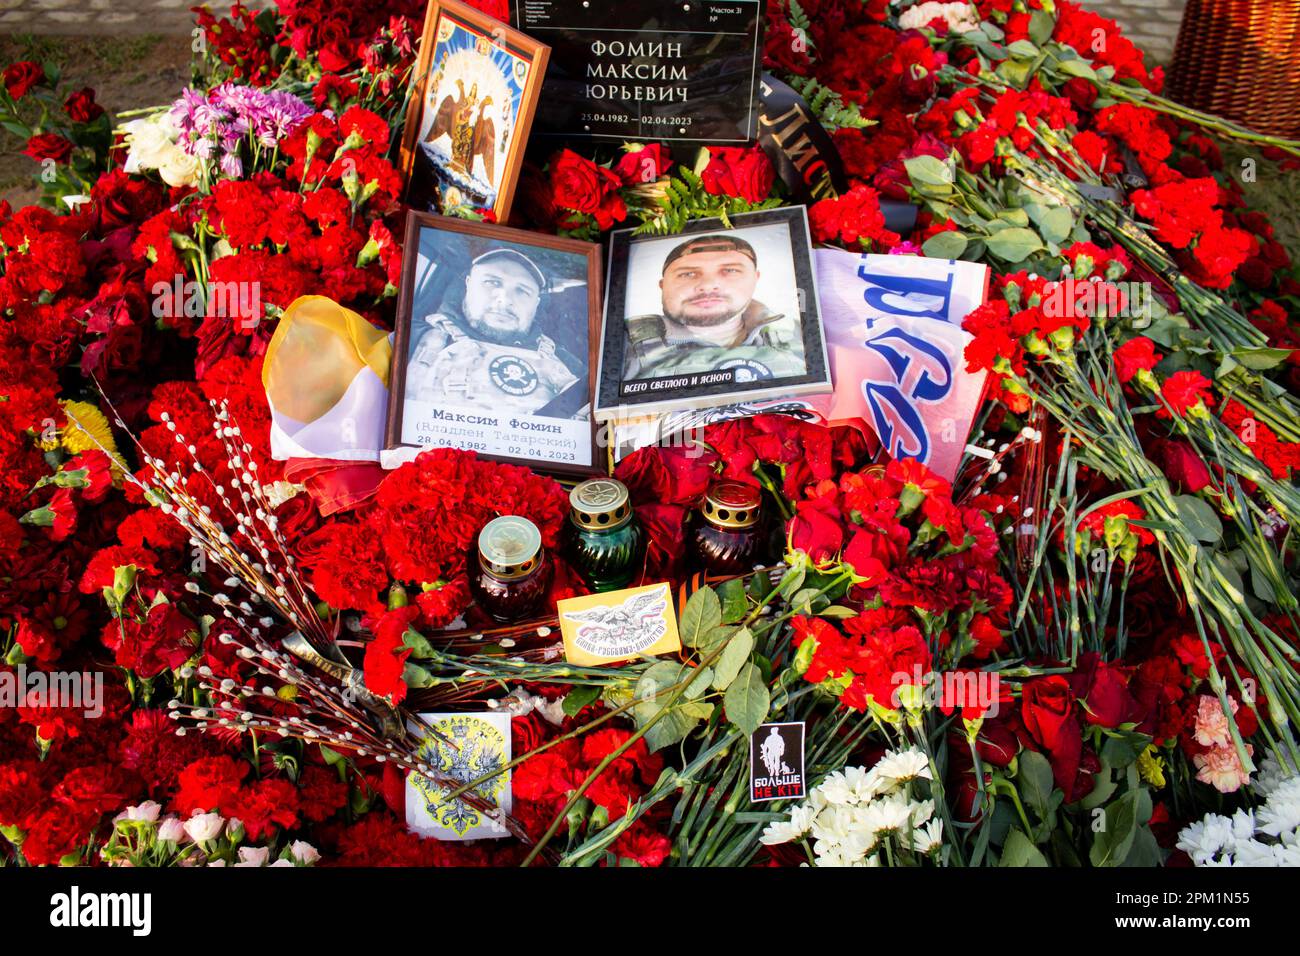 Pictures of Vladlen Tatarsky and flowers seen at his grave at Troyekurovskoye cemetery in Moscow. Maxim Fomin better known by his pen-name Vladlen Tatarsky was a convicted criminal who escaped from prison and made a name for himself as a Ukrainian-born Russian military blogger and a participant in the war between Russian and Ukraine. He was active as a propagandist for the Russian side in the war until he was murdered in a terrorist act in St. Petersburg on April 2, 2023. 26-year-old woman named Darya Trepova was arrested for the bombing that had killed Tatarsky and injured dozens of others. ( Stock Photo